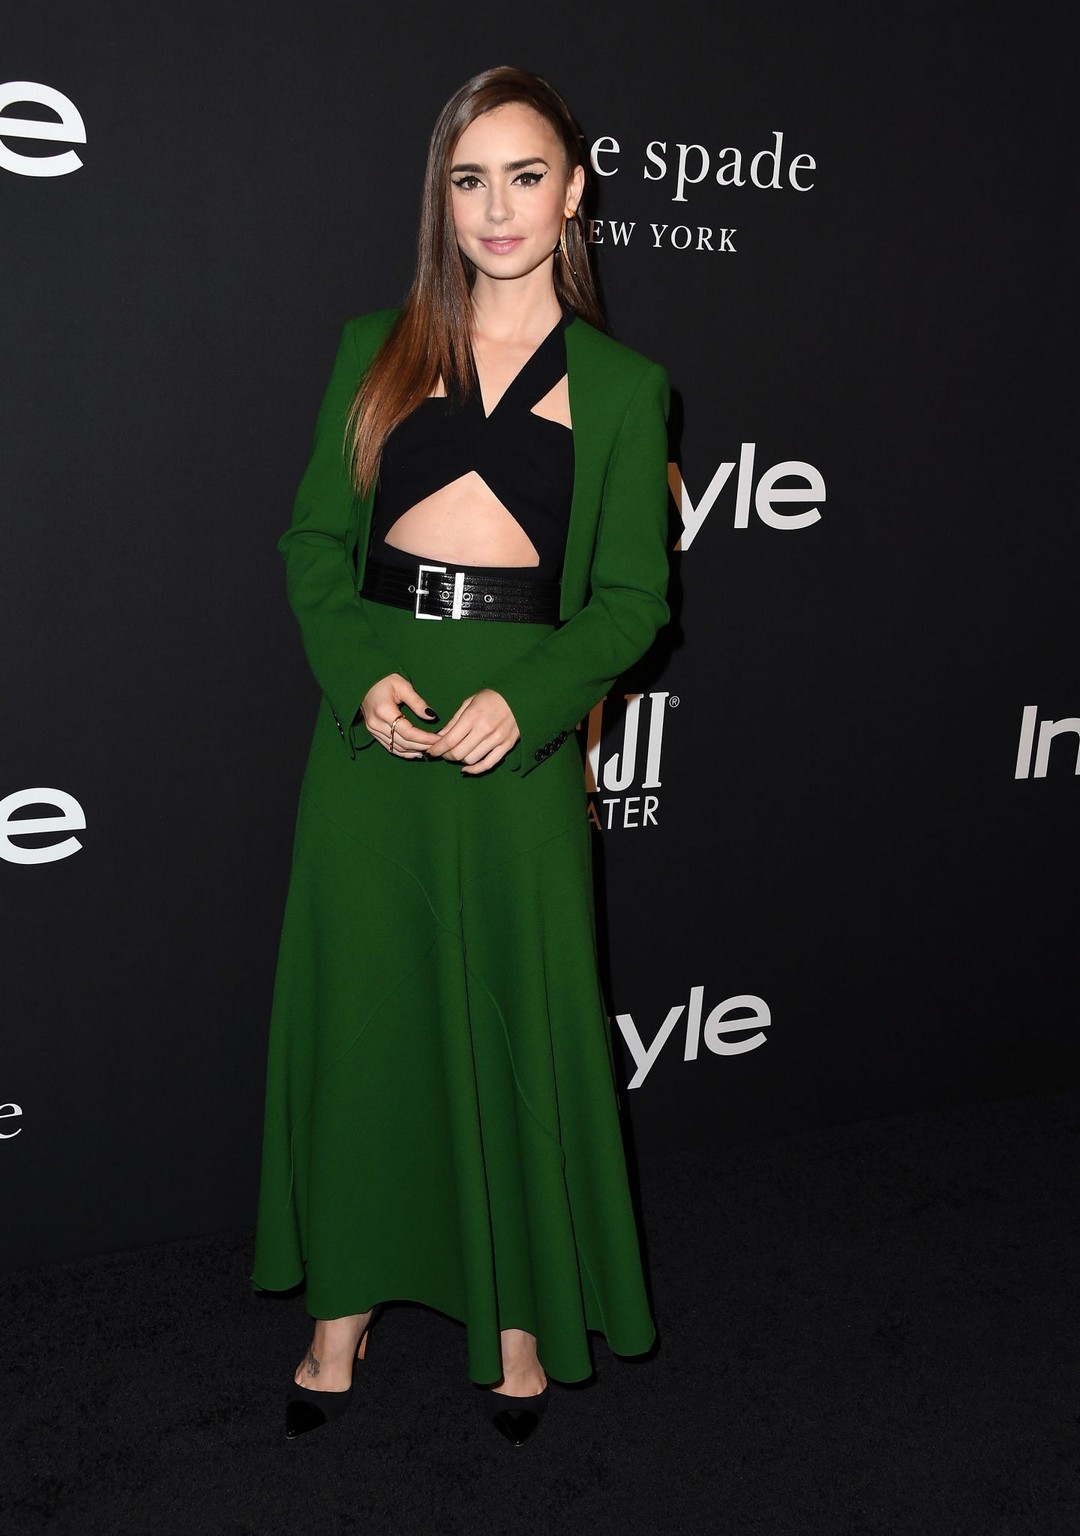 4th_Annual_InStyle_Awards_at_The_Getty_Center_39.jpg